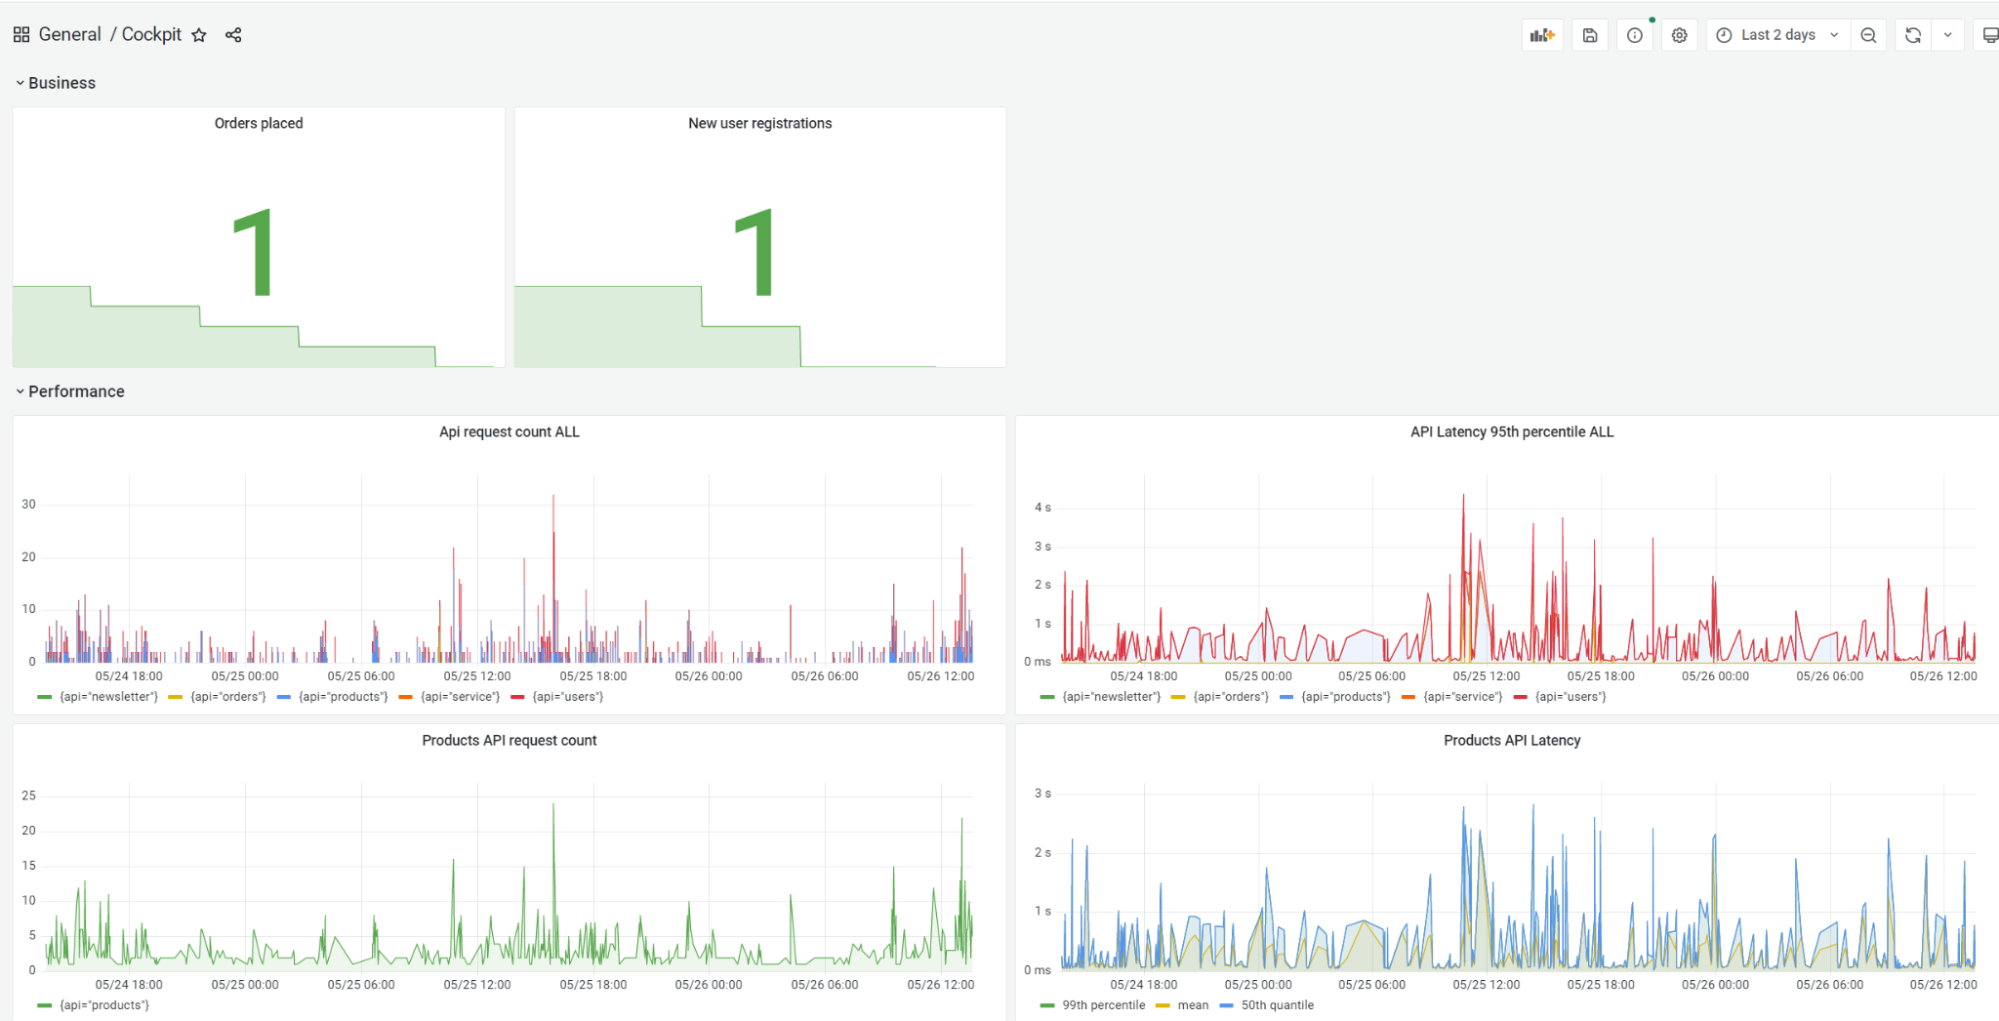 Grafana dashboard monitoring the online customer experience of an online honey business.